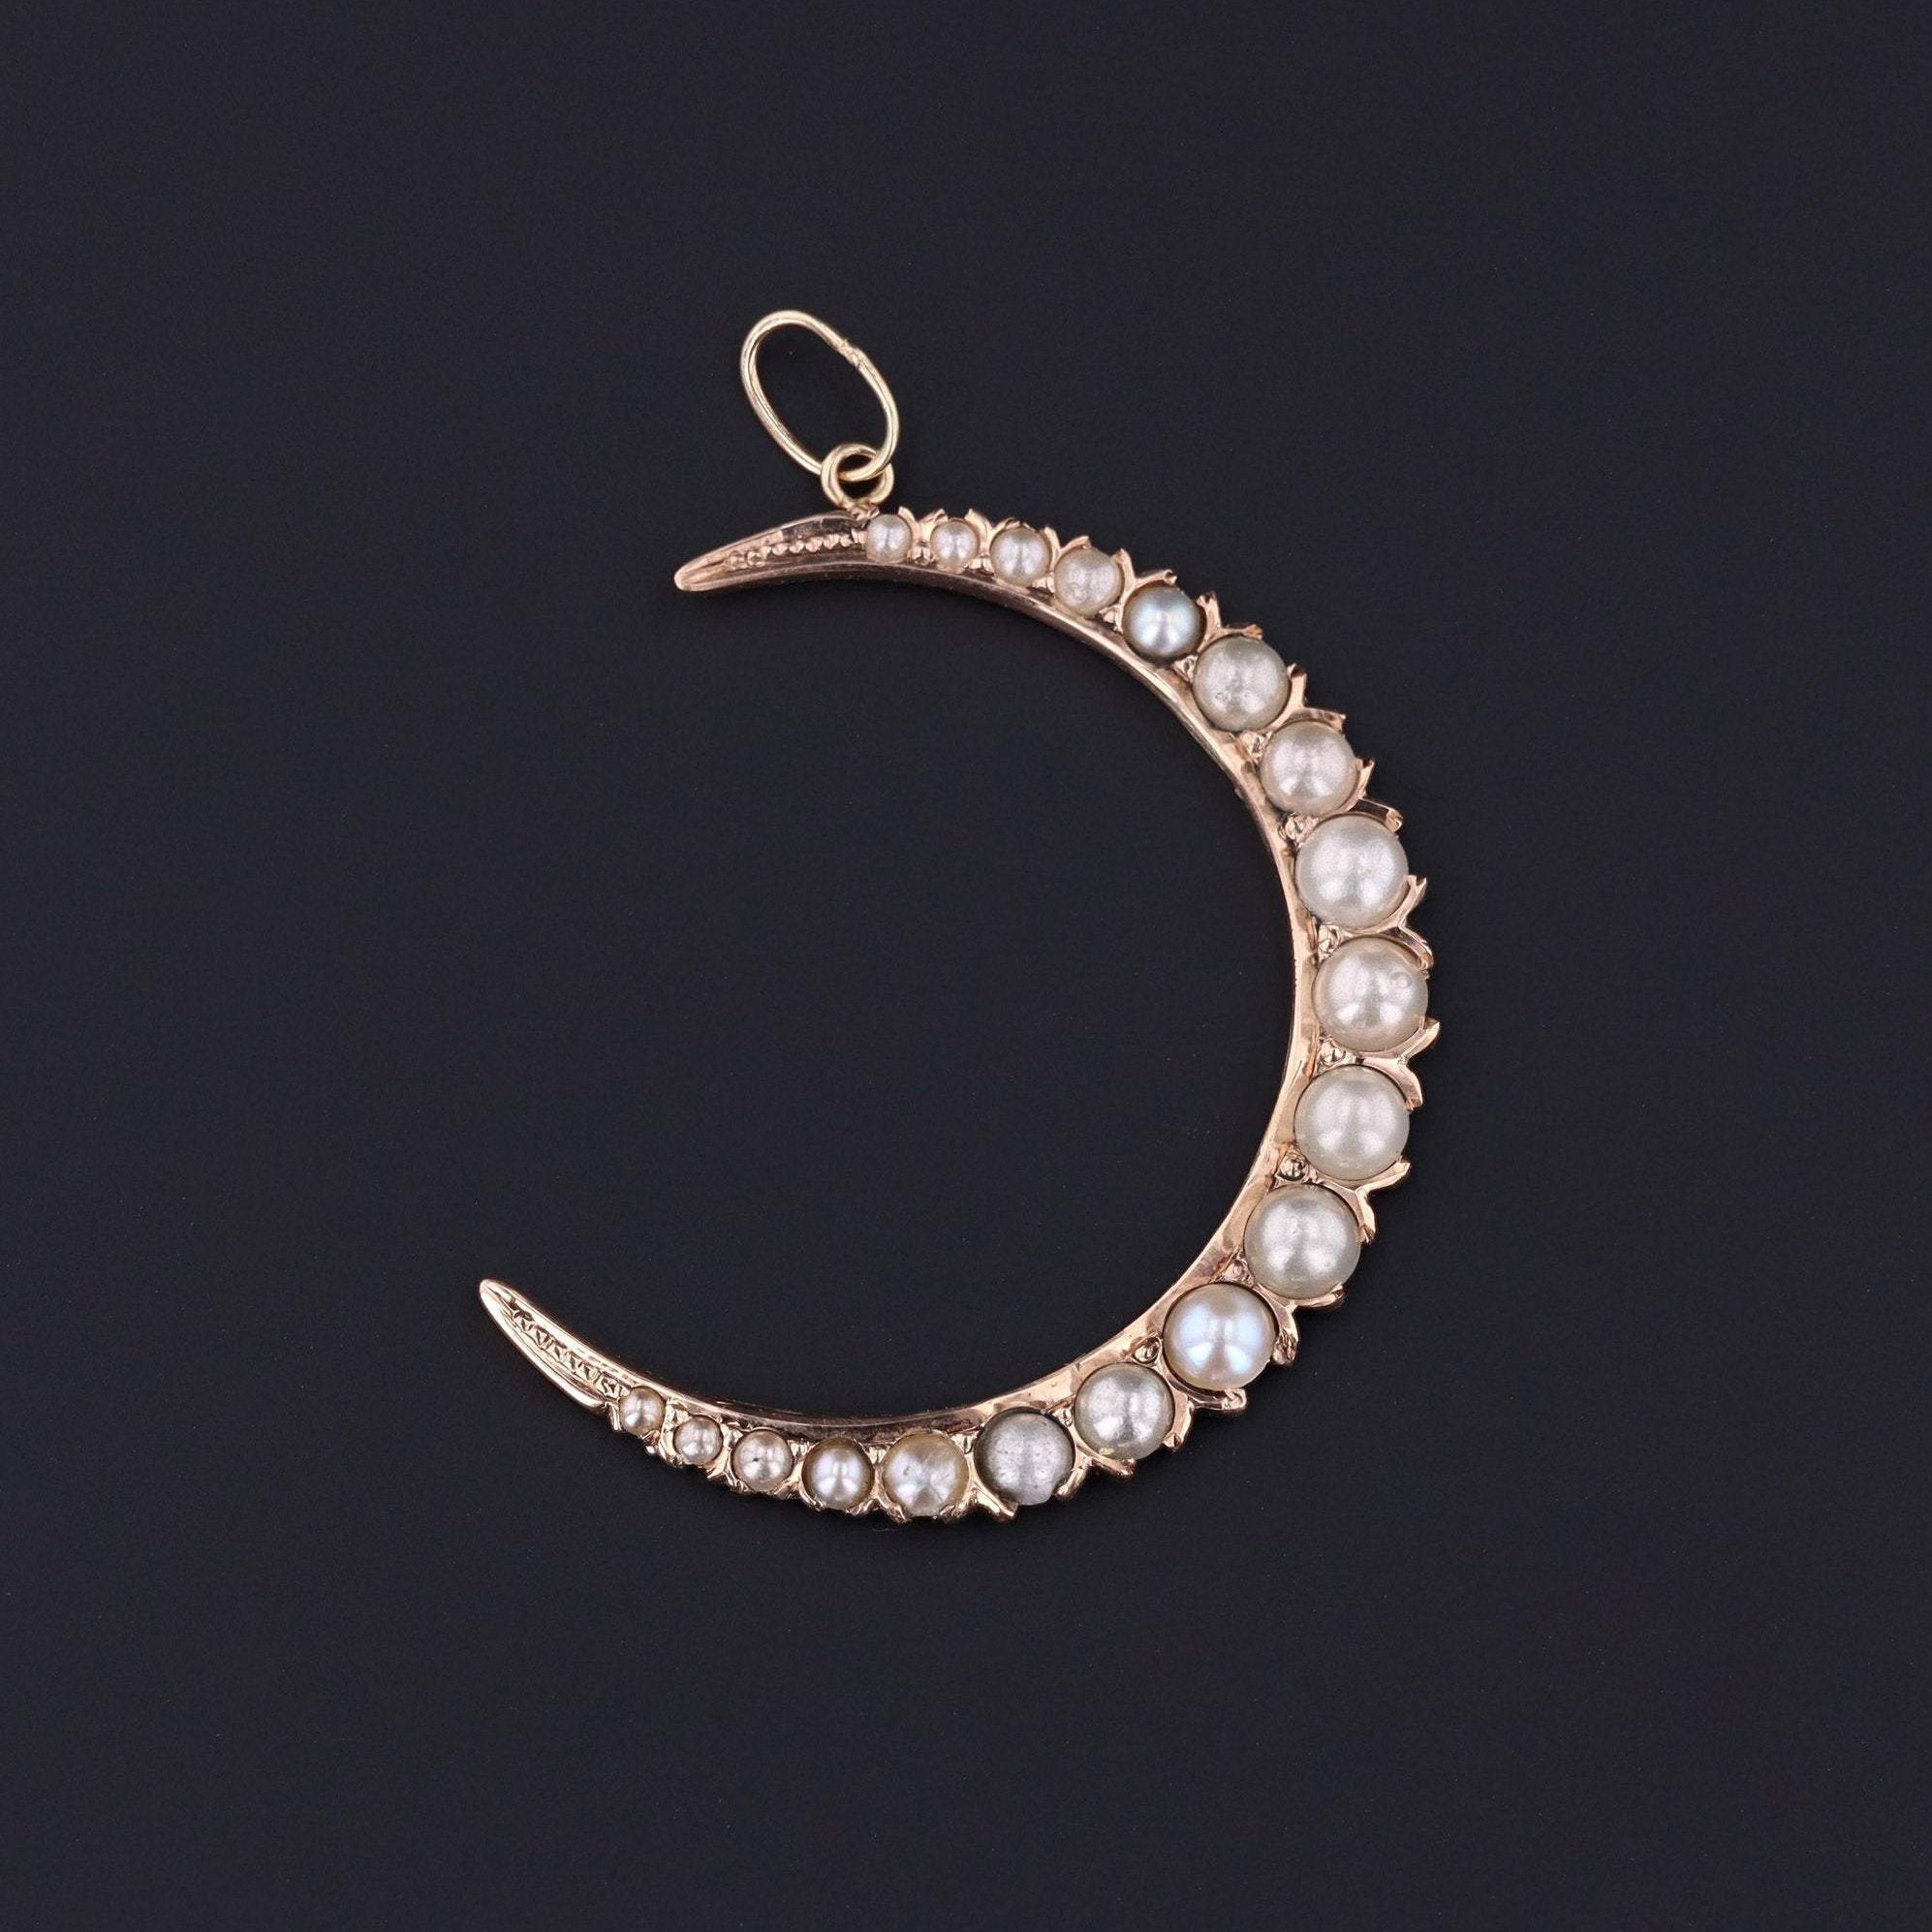 10k Gold Crescent Moon Pendant | Simulated Pearl Crescent Pendant | 10k Gold Pendant